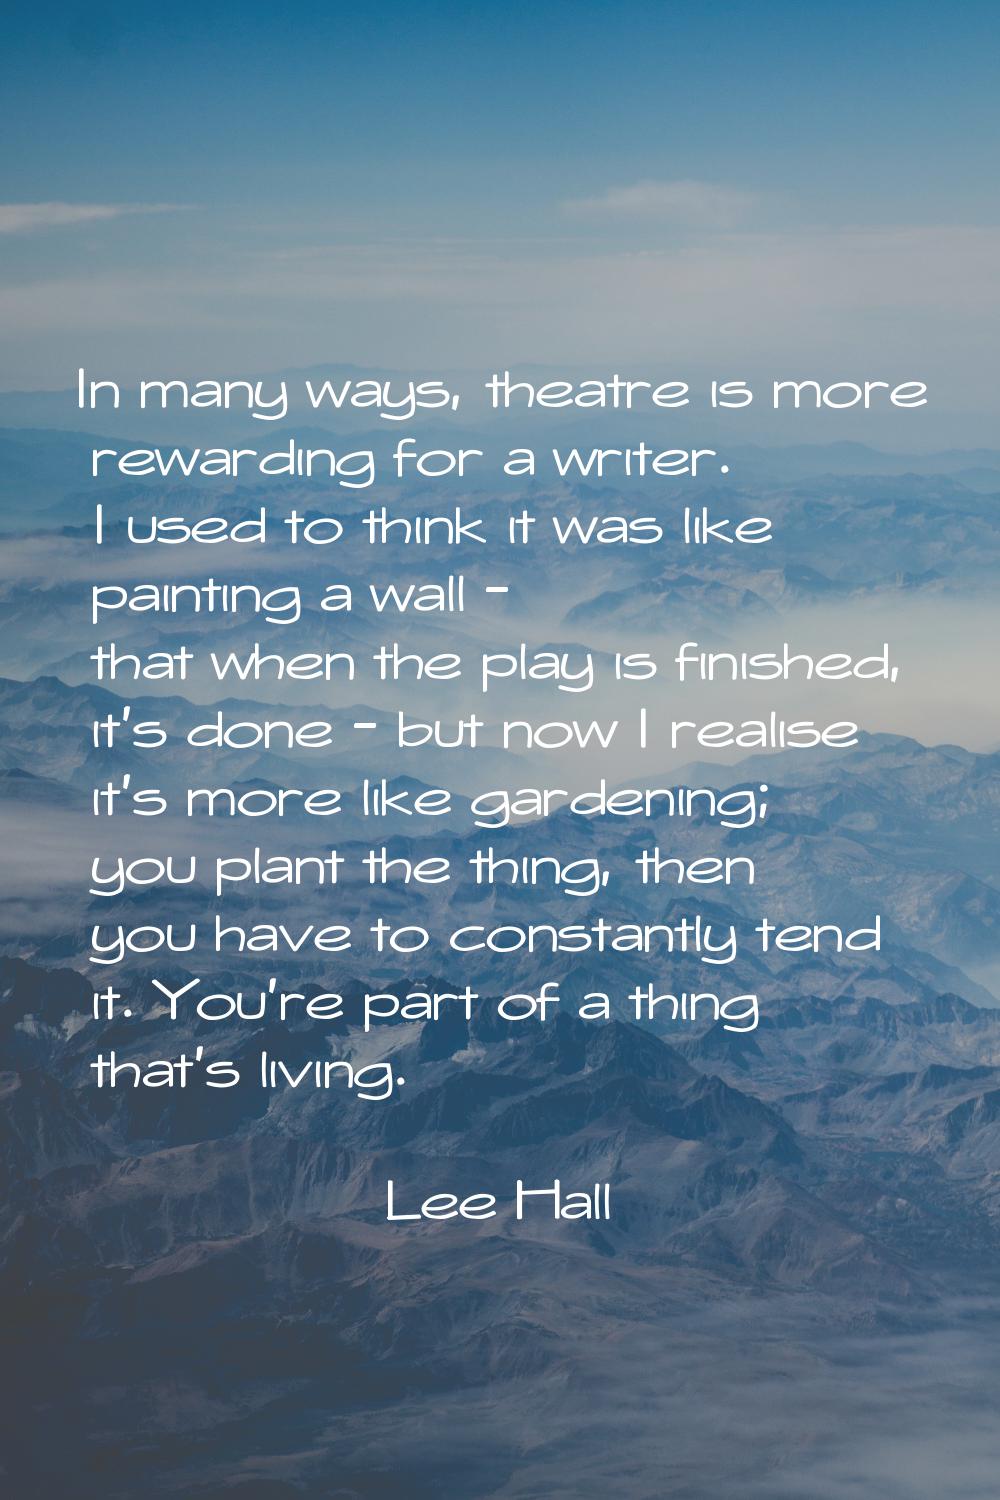 In many ways, theatre is more rewarding for a writer. I used to think it was like painting a wall -